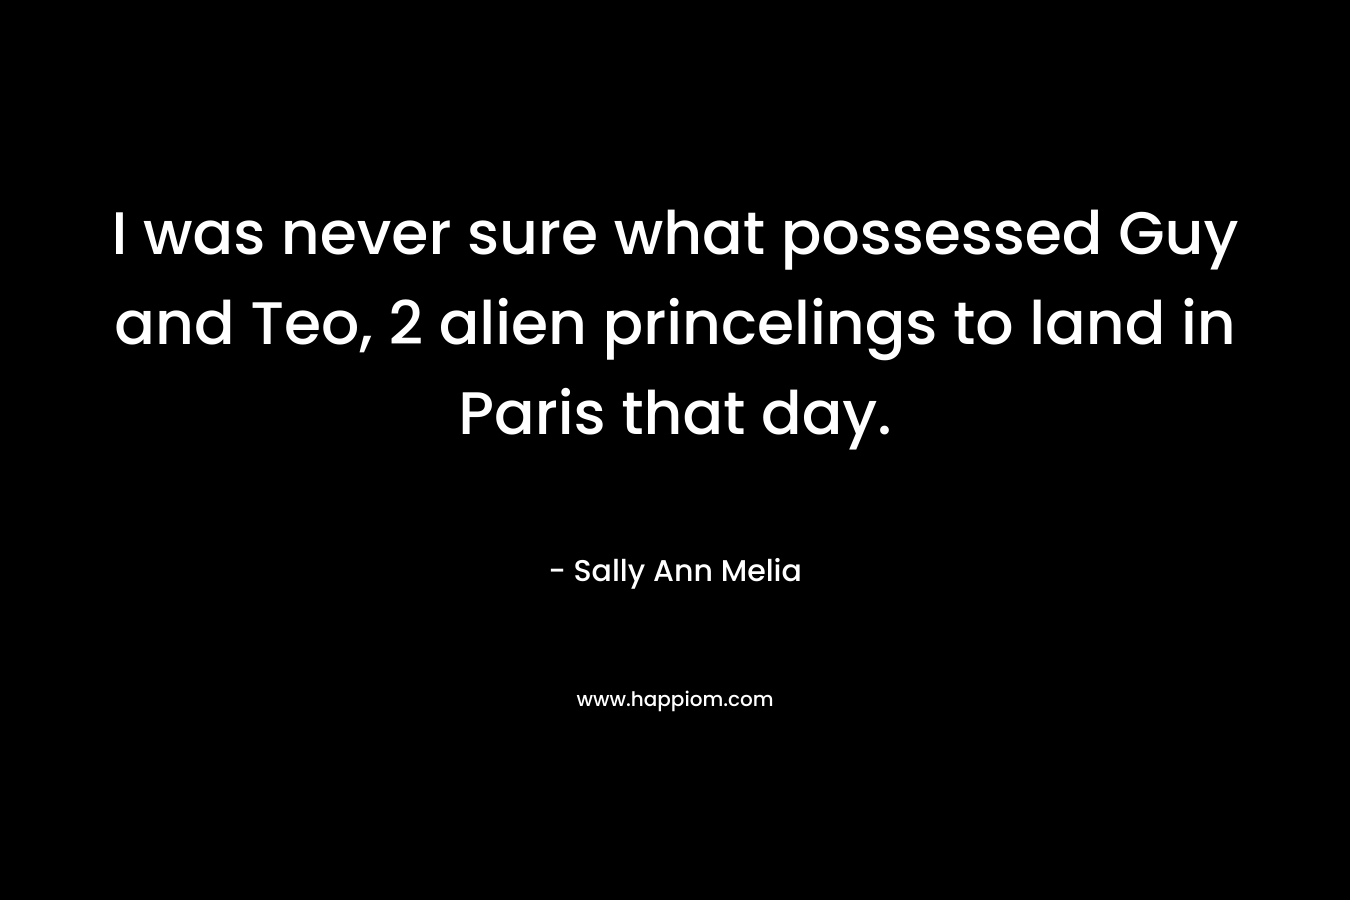 I was never sure what possessed Guy and Teo, 2 alien princelings to land in Paris that day.